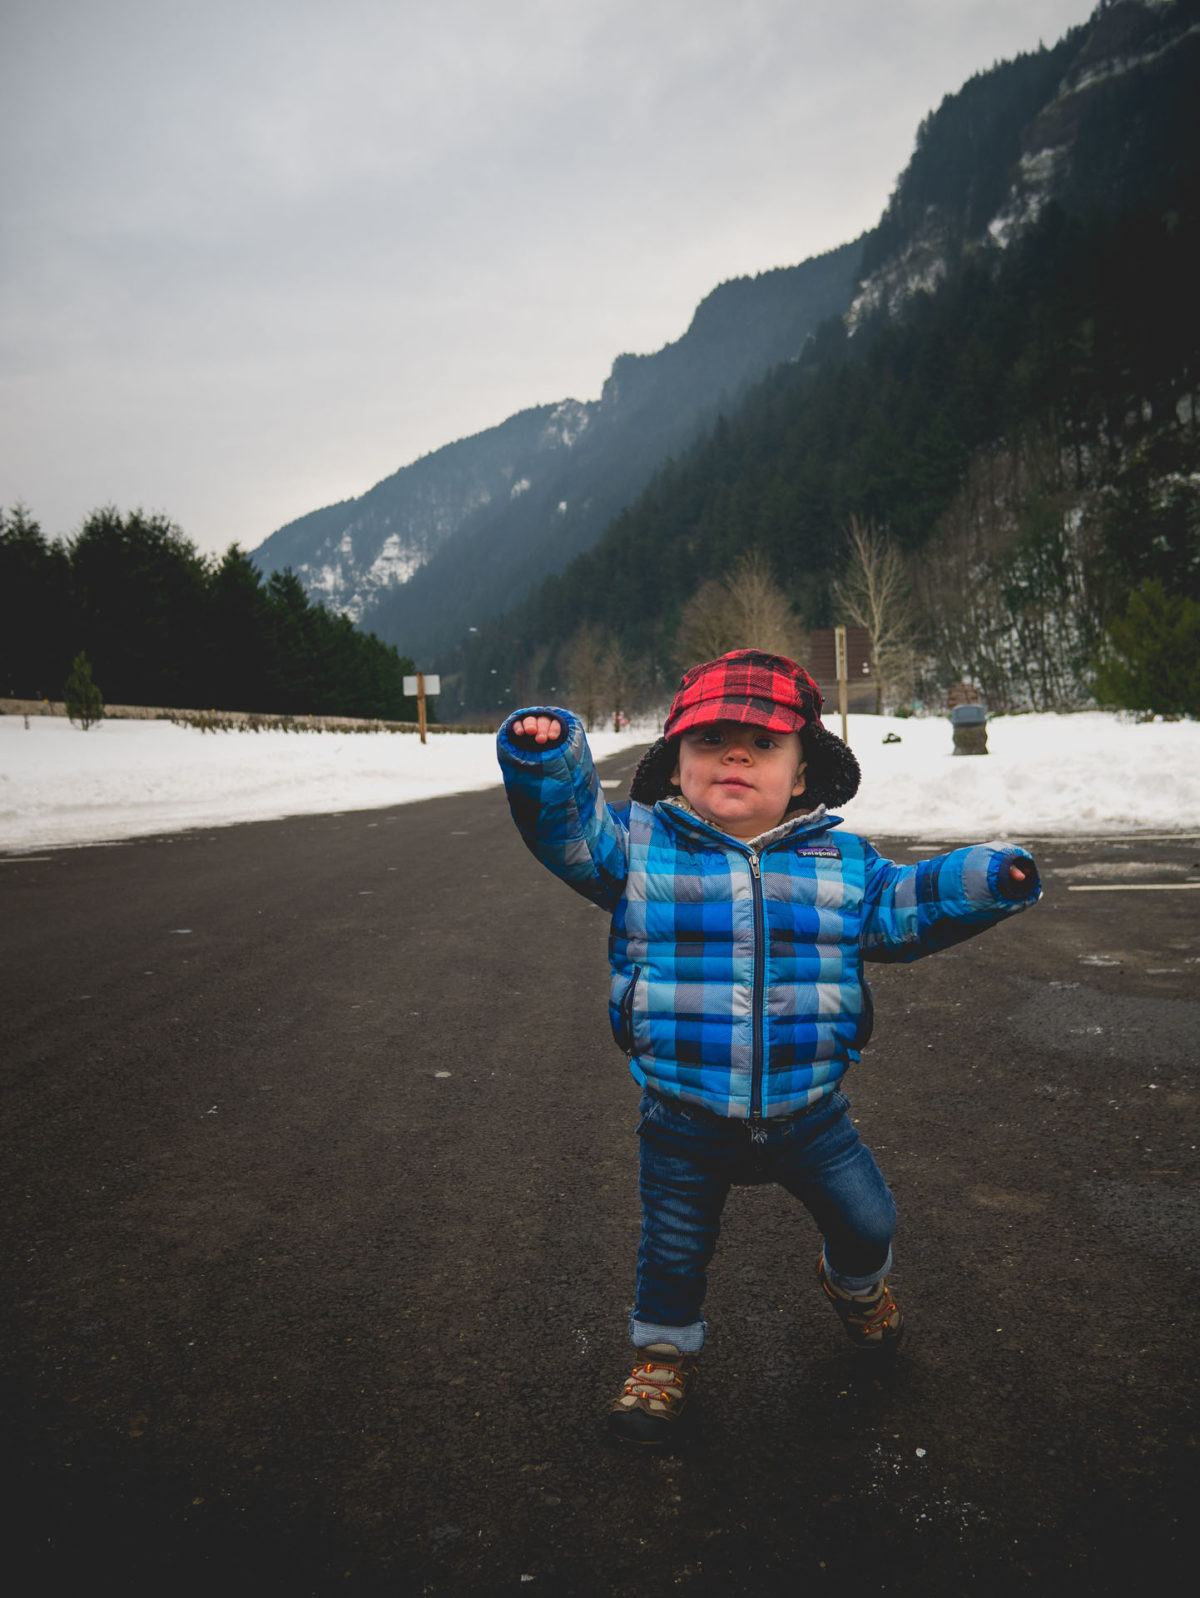 Toddler walking down road with snow and forests in the background